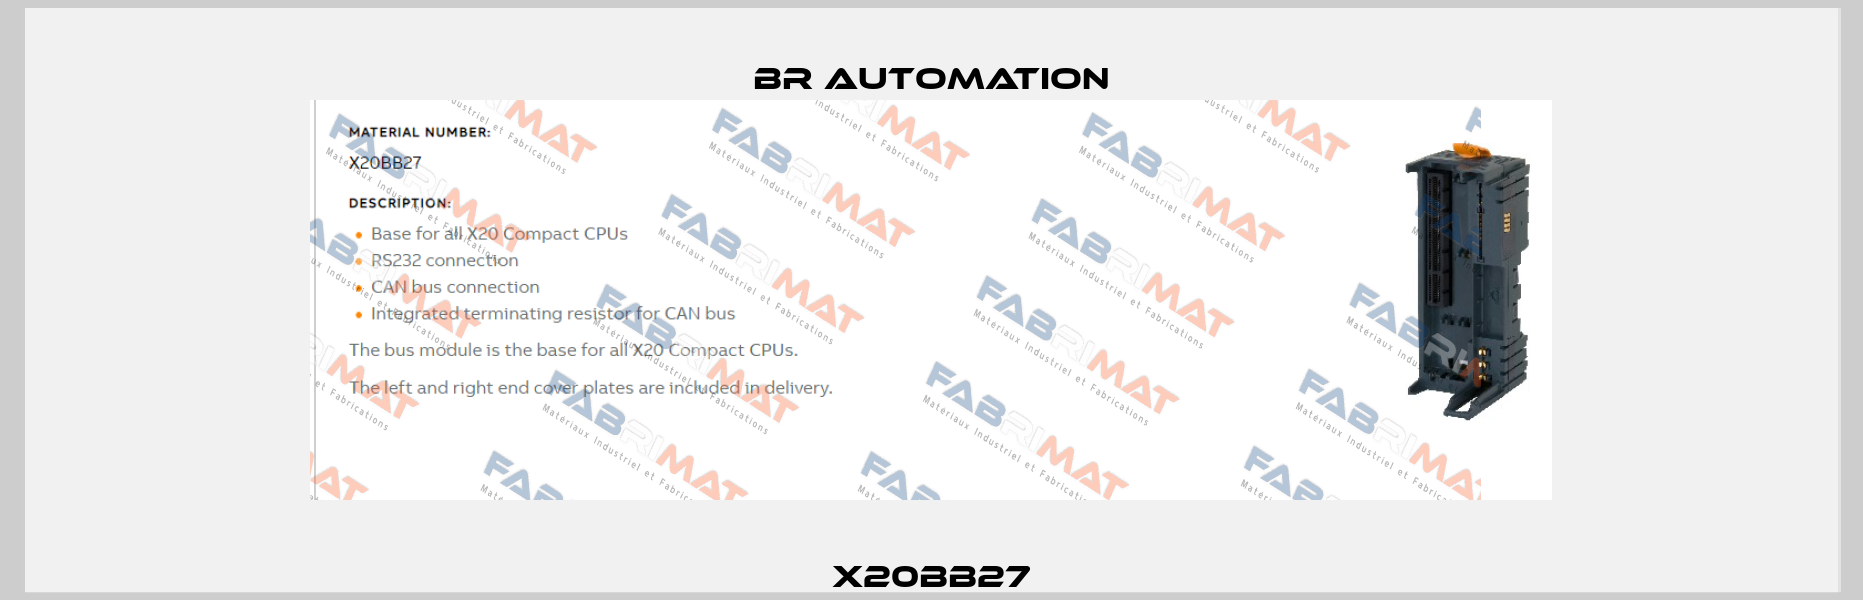 X20BB27 Br Automation